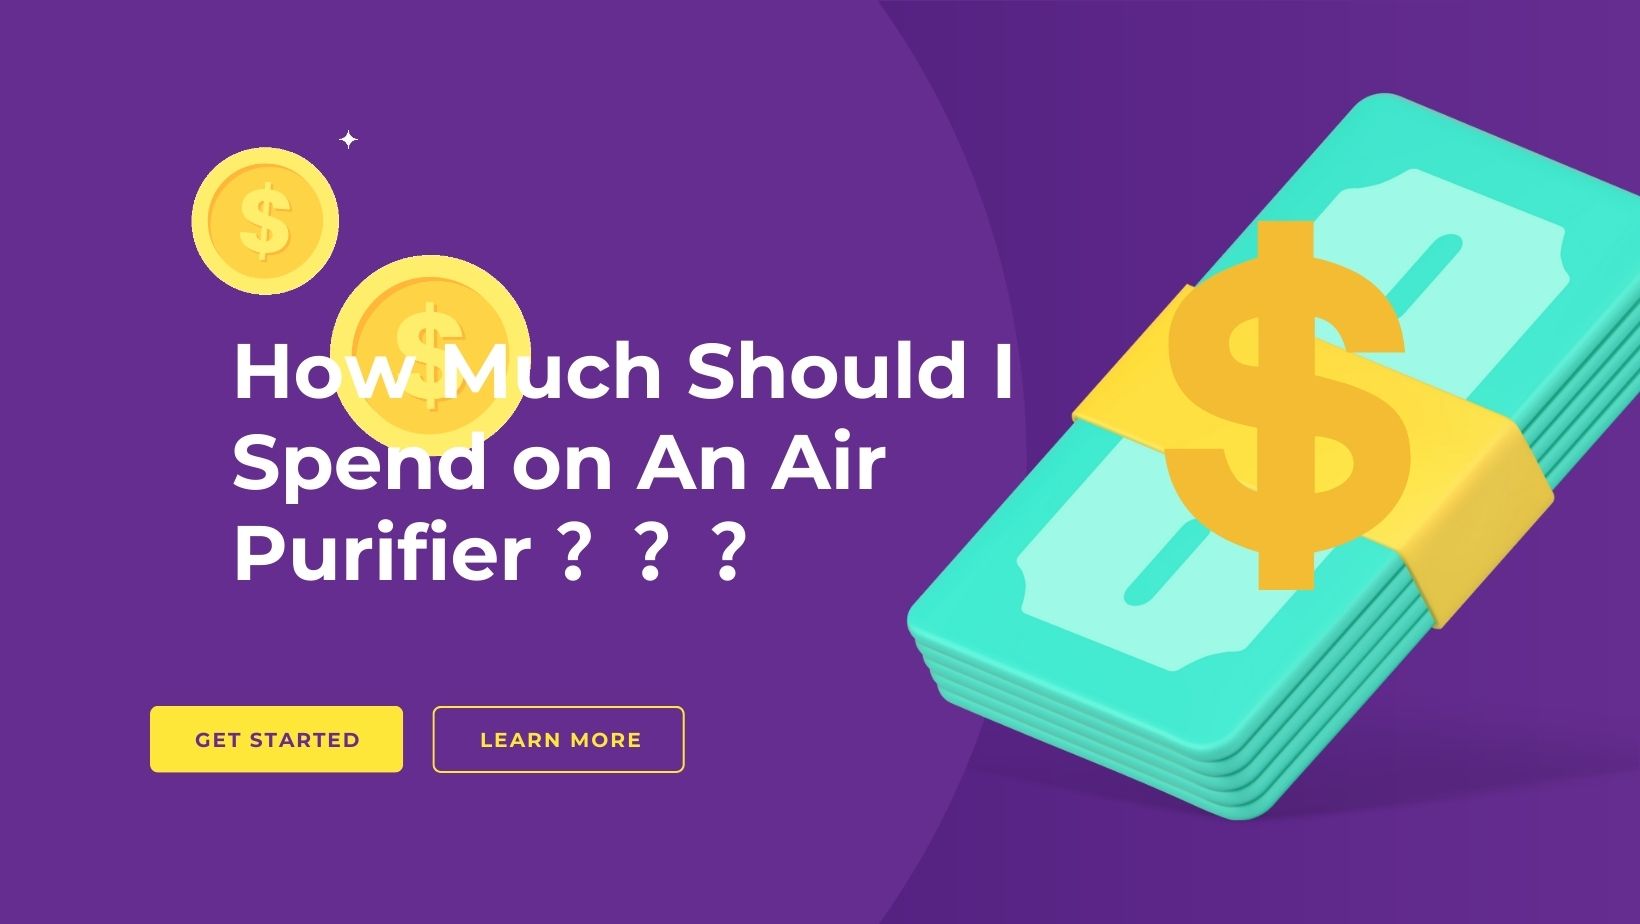 How to save and How Much Should I Spend on An Air Purifier.jpg